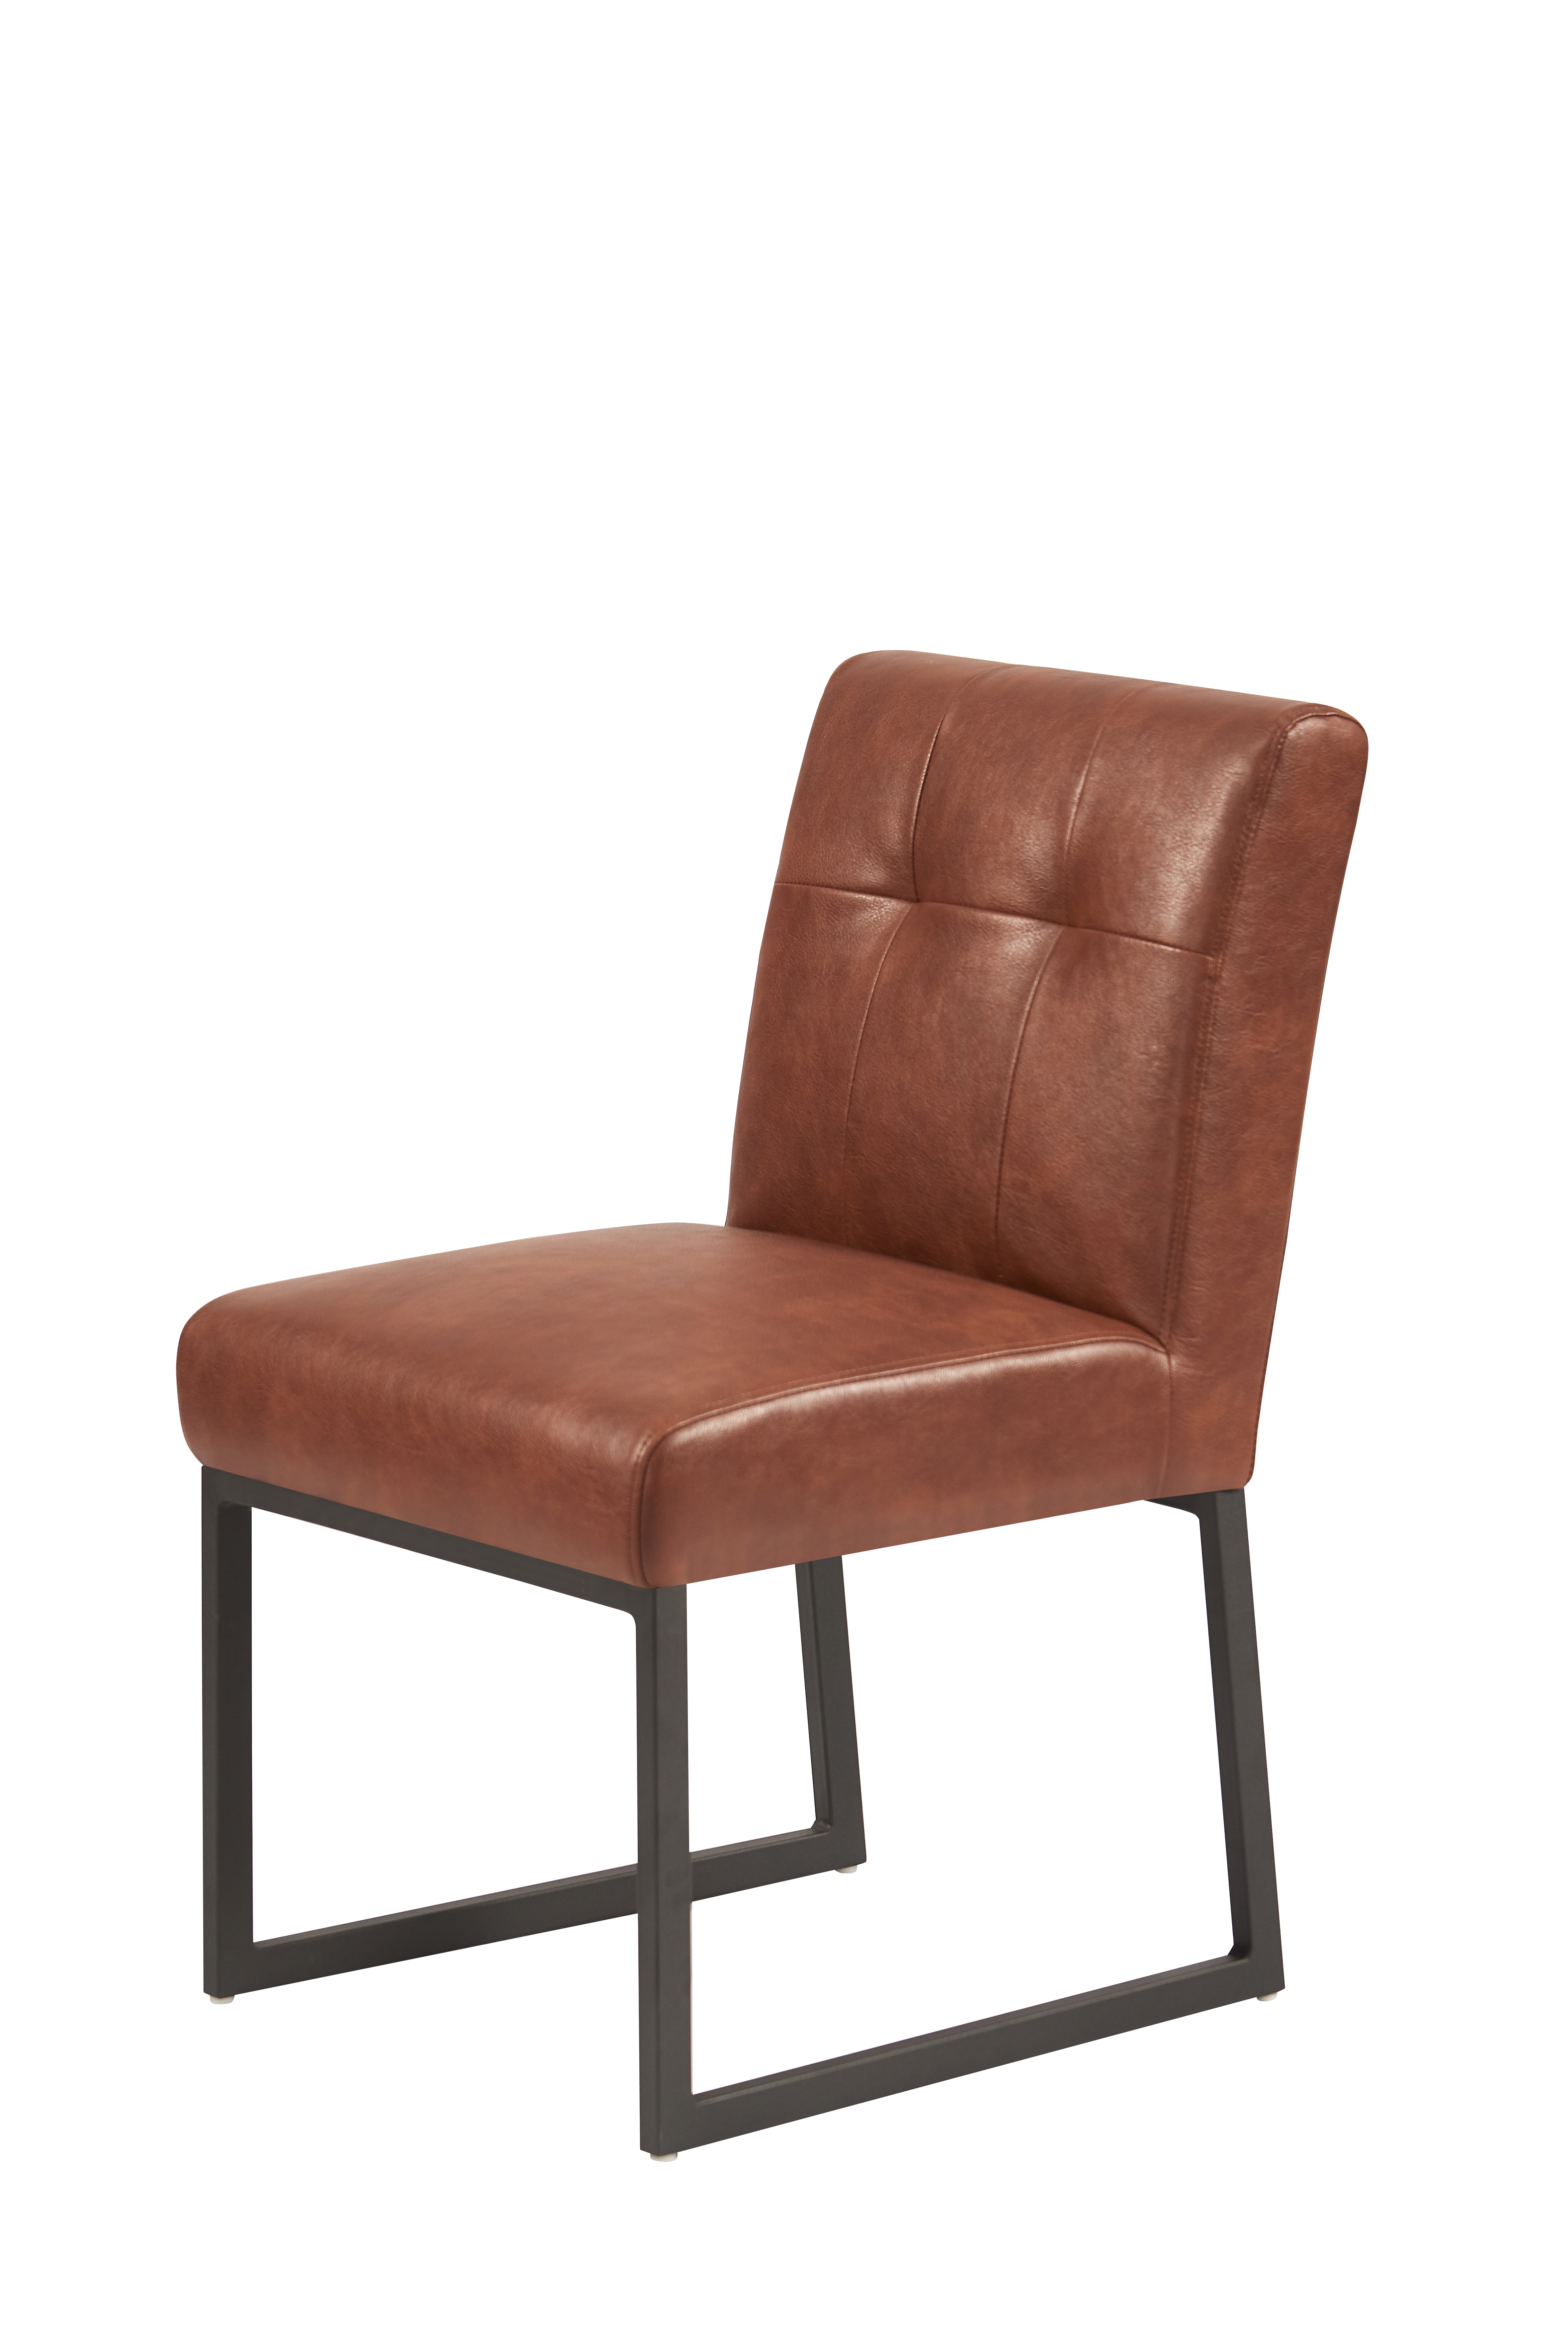 TC-2153 Dining Chair with PU fabric Featured Image